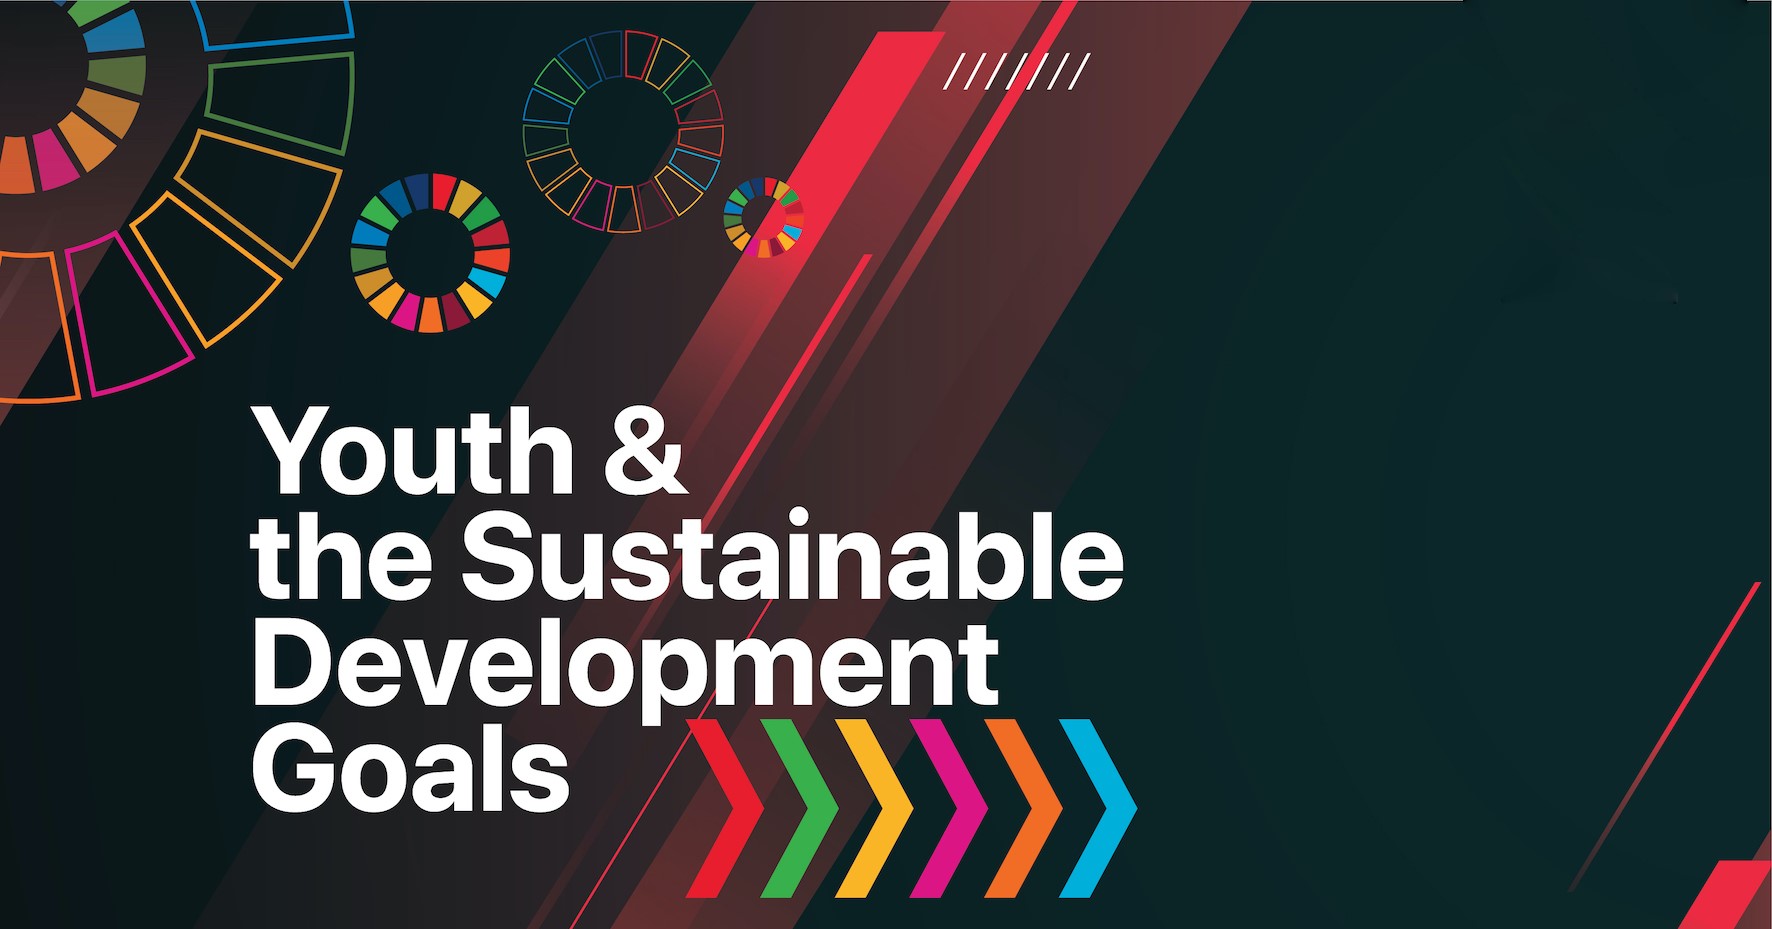 Youth & the Sustainable Development Goals